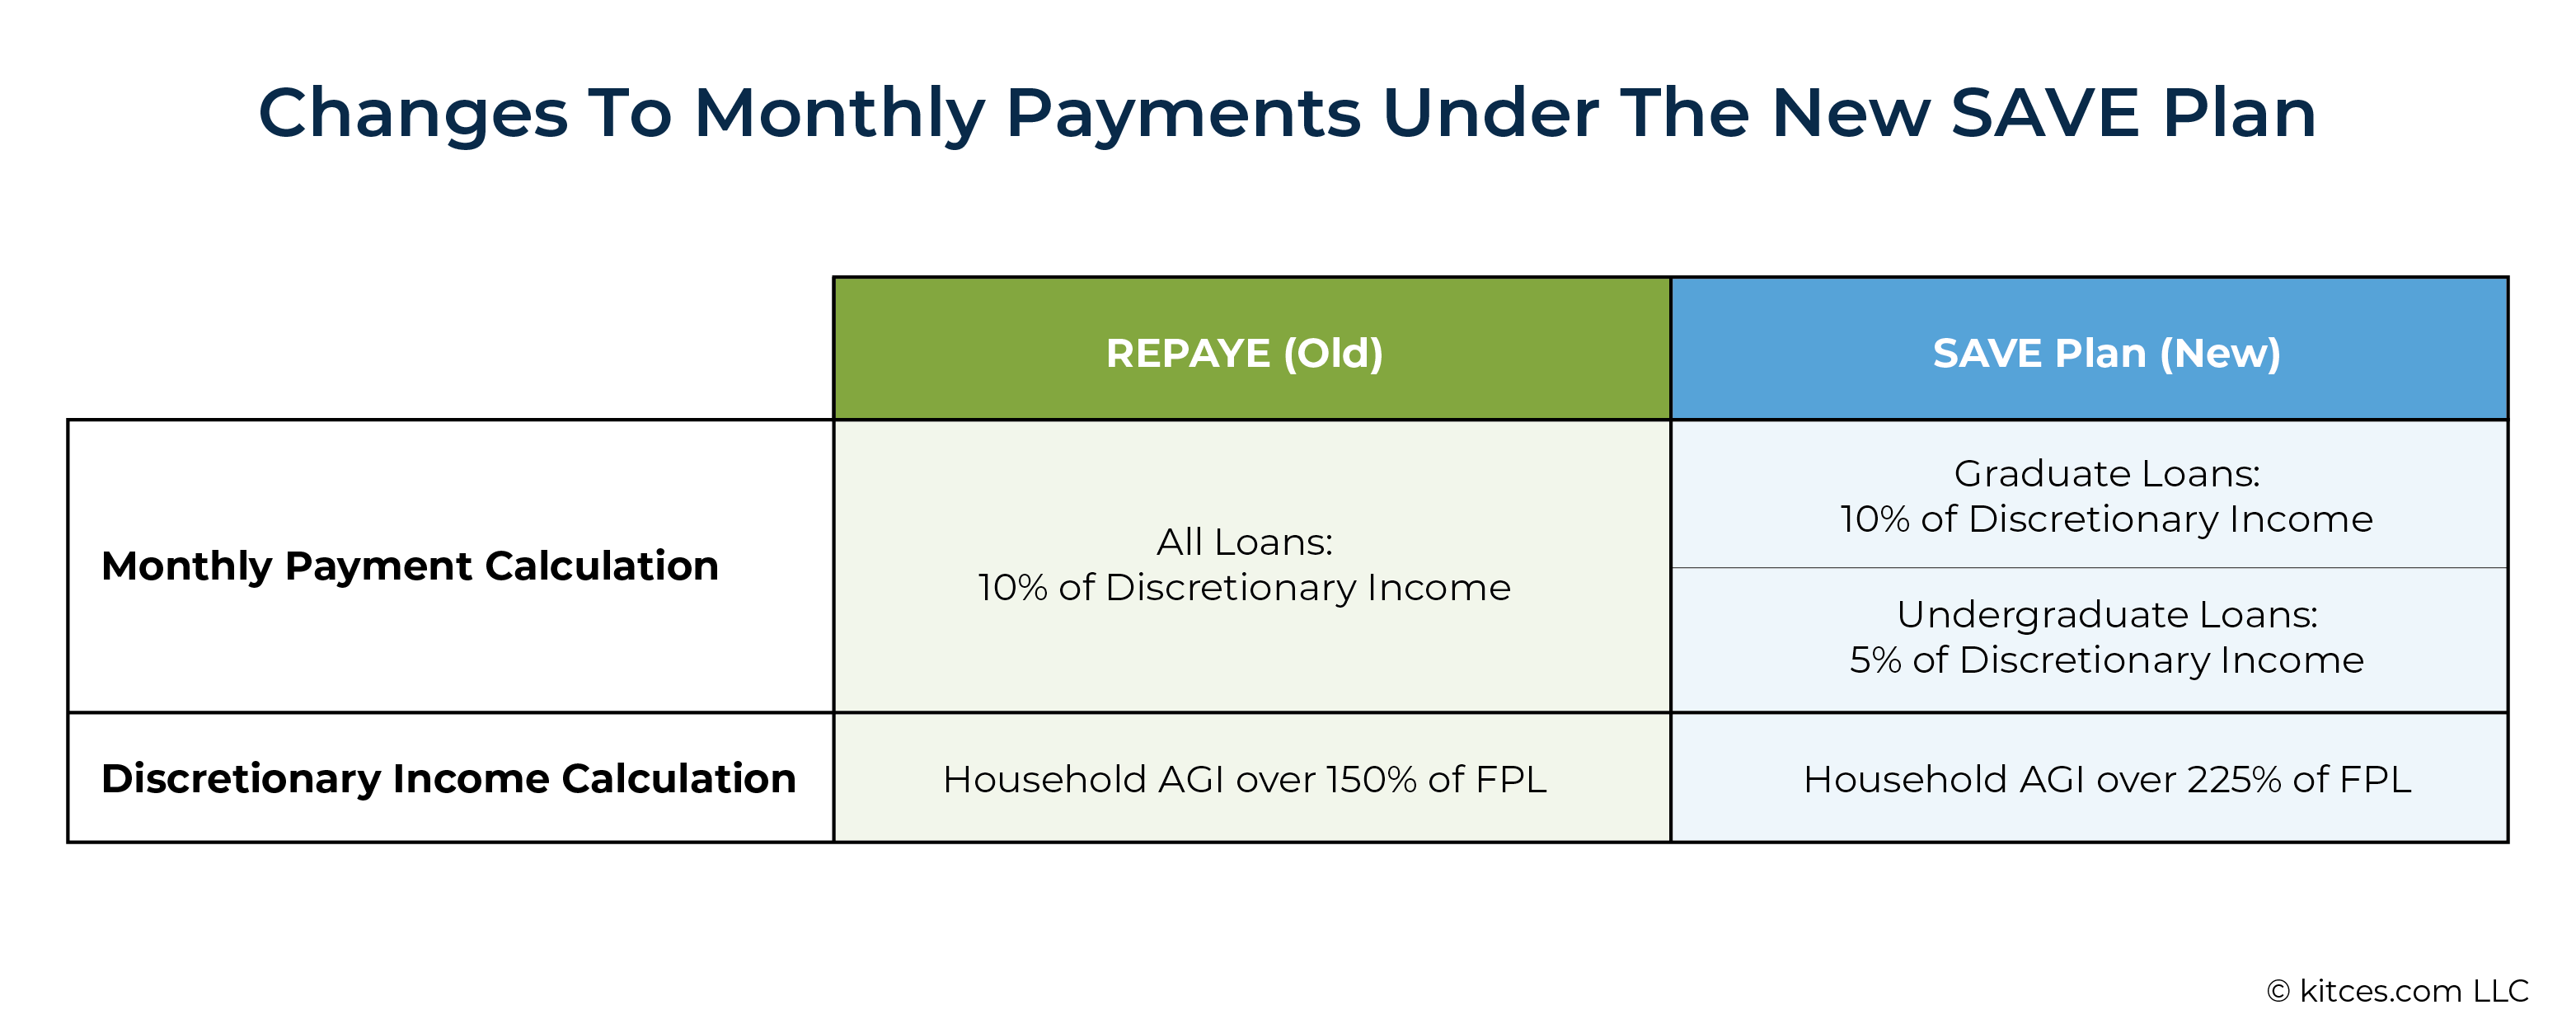 How The New SAVE Plan Impacts Student Loan Planning